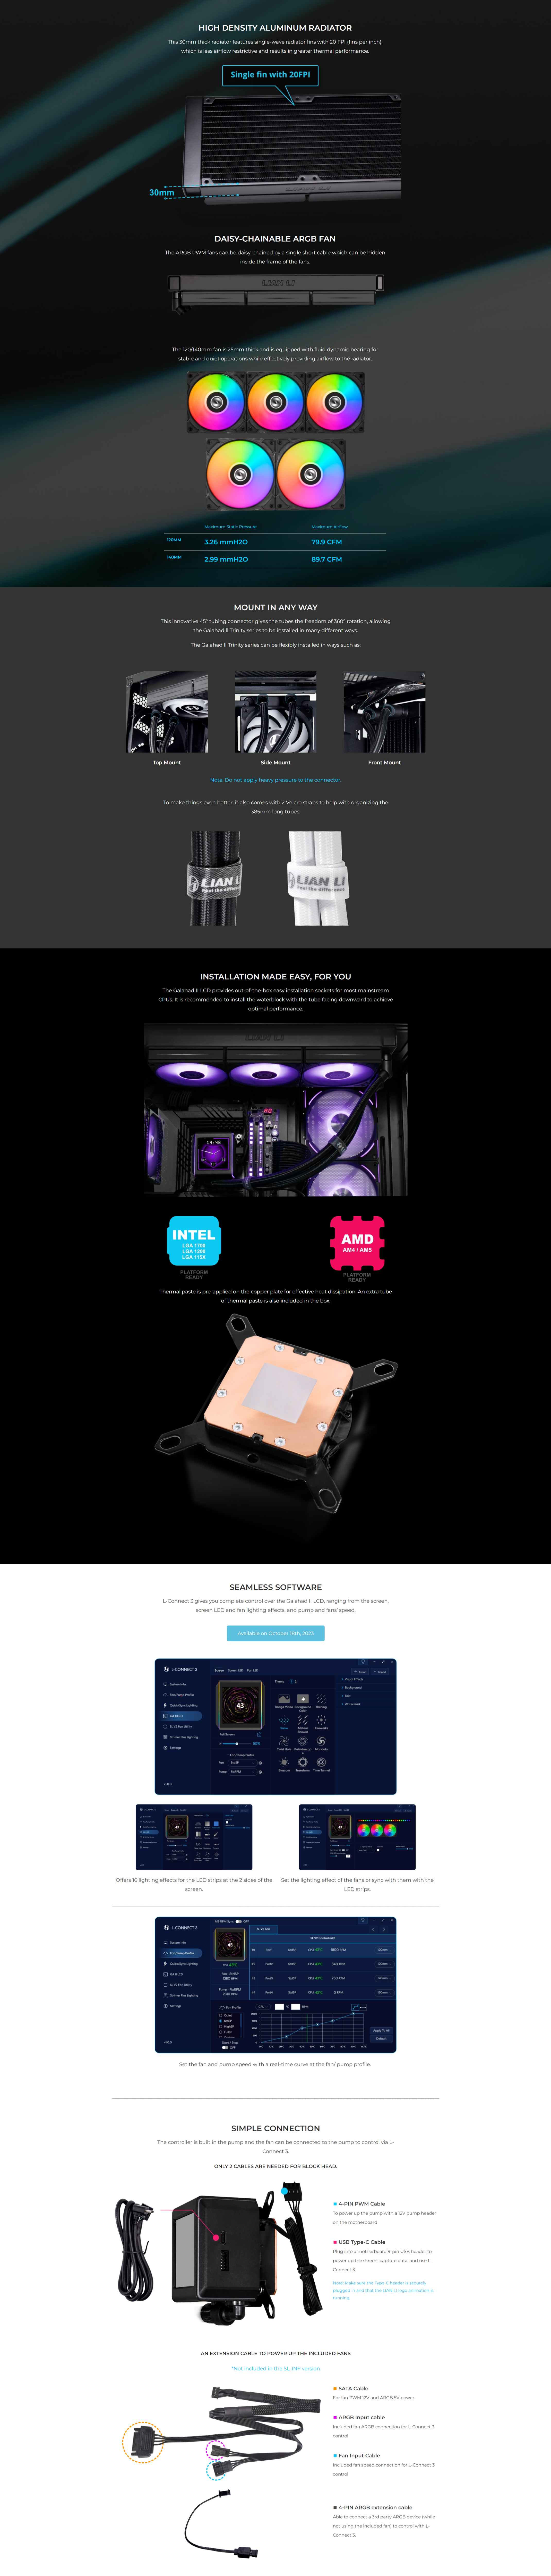 A large marketing image providing additional information about the product Lian Li Galahad II LCD 360 RGB 360mm AIO Liquid CPU Cooler - White - Additional alt info not provided